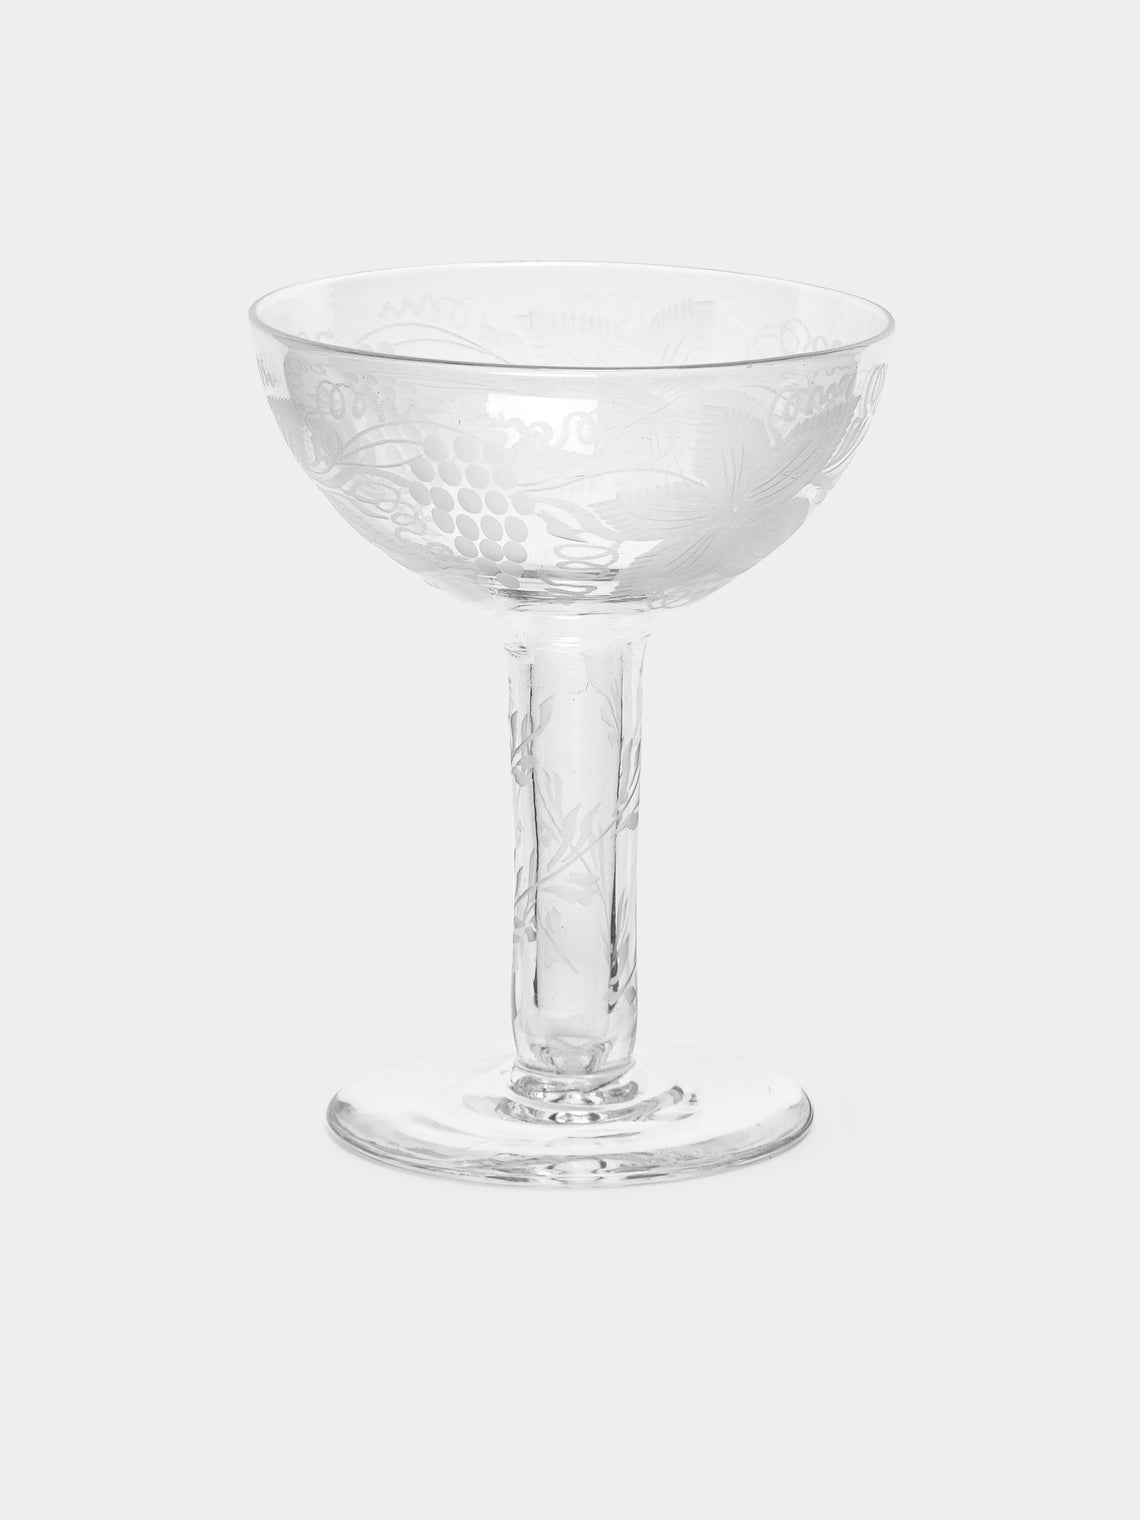 Antique and Vintage - 1830s Vine Etched Hollow Stem Champagne Coupe (Set of 8) -  - ABASK - 